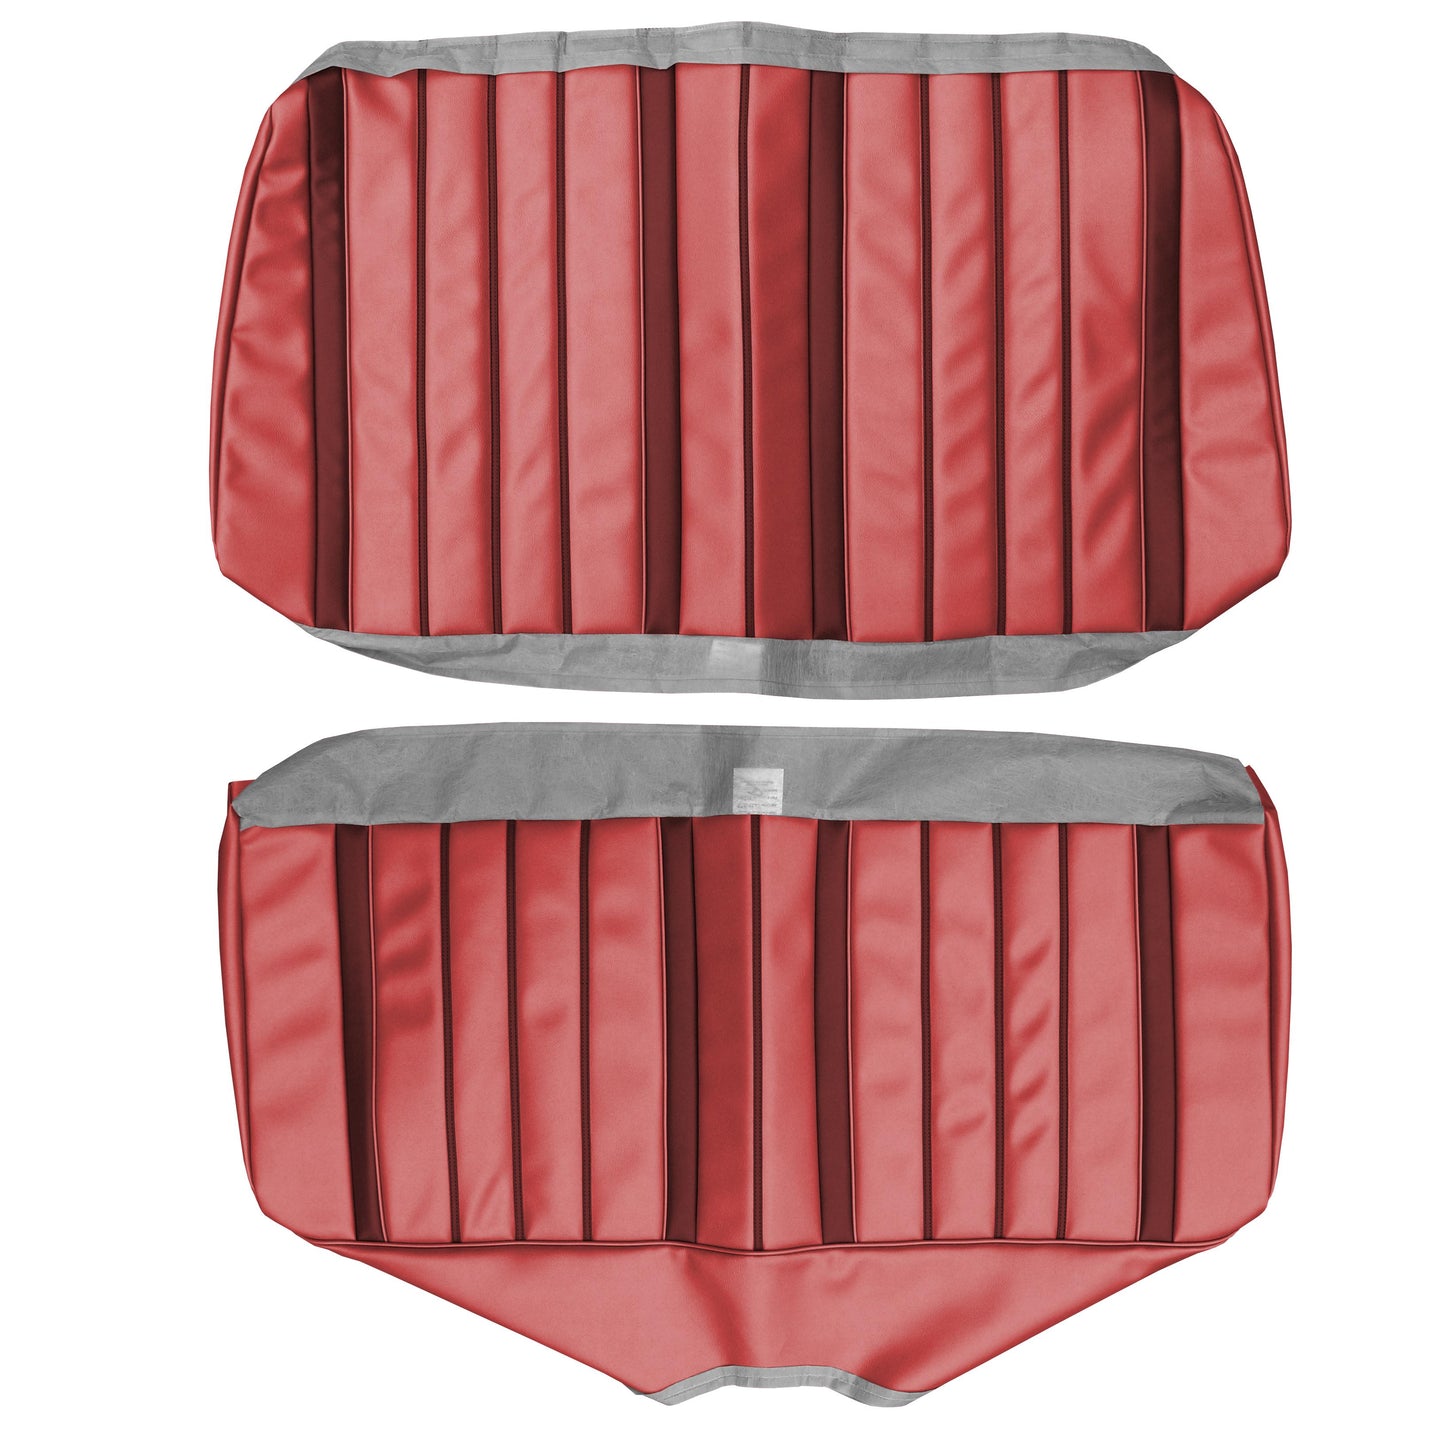 66 SKYLARK/GS CONVERTIBLE REAR UPHOLSTERY - RED W/ DARK RED ACCENT